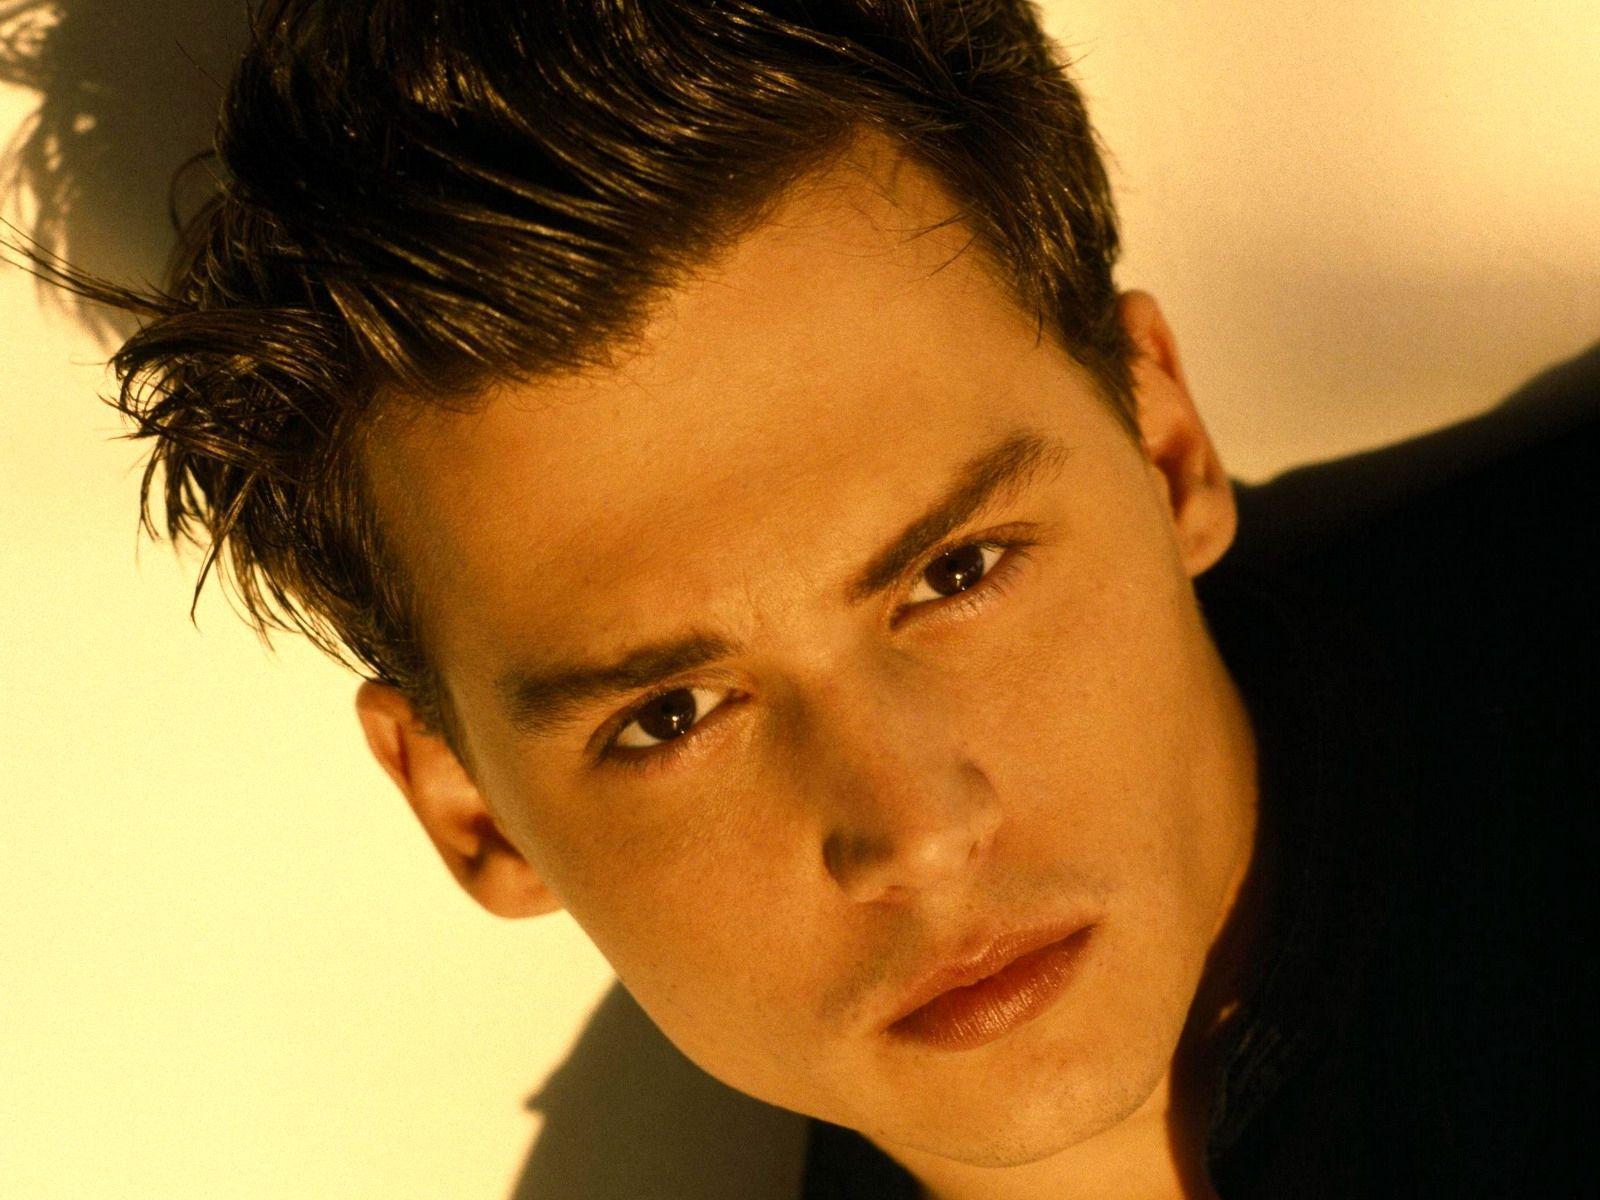 Young Johnny Depp Wallpaper And Wallpaper Full HD Archived at